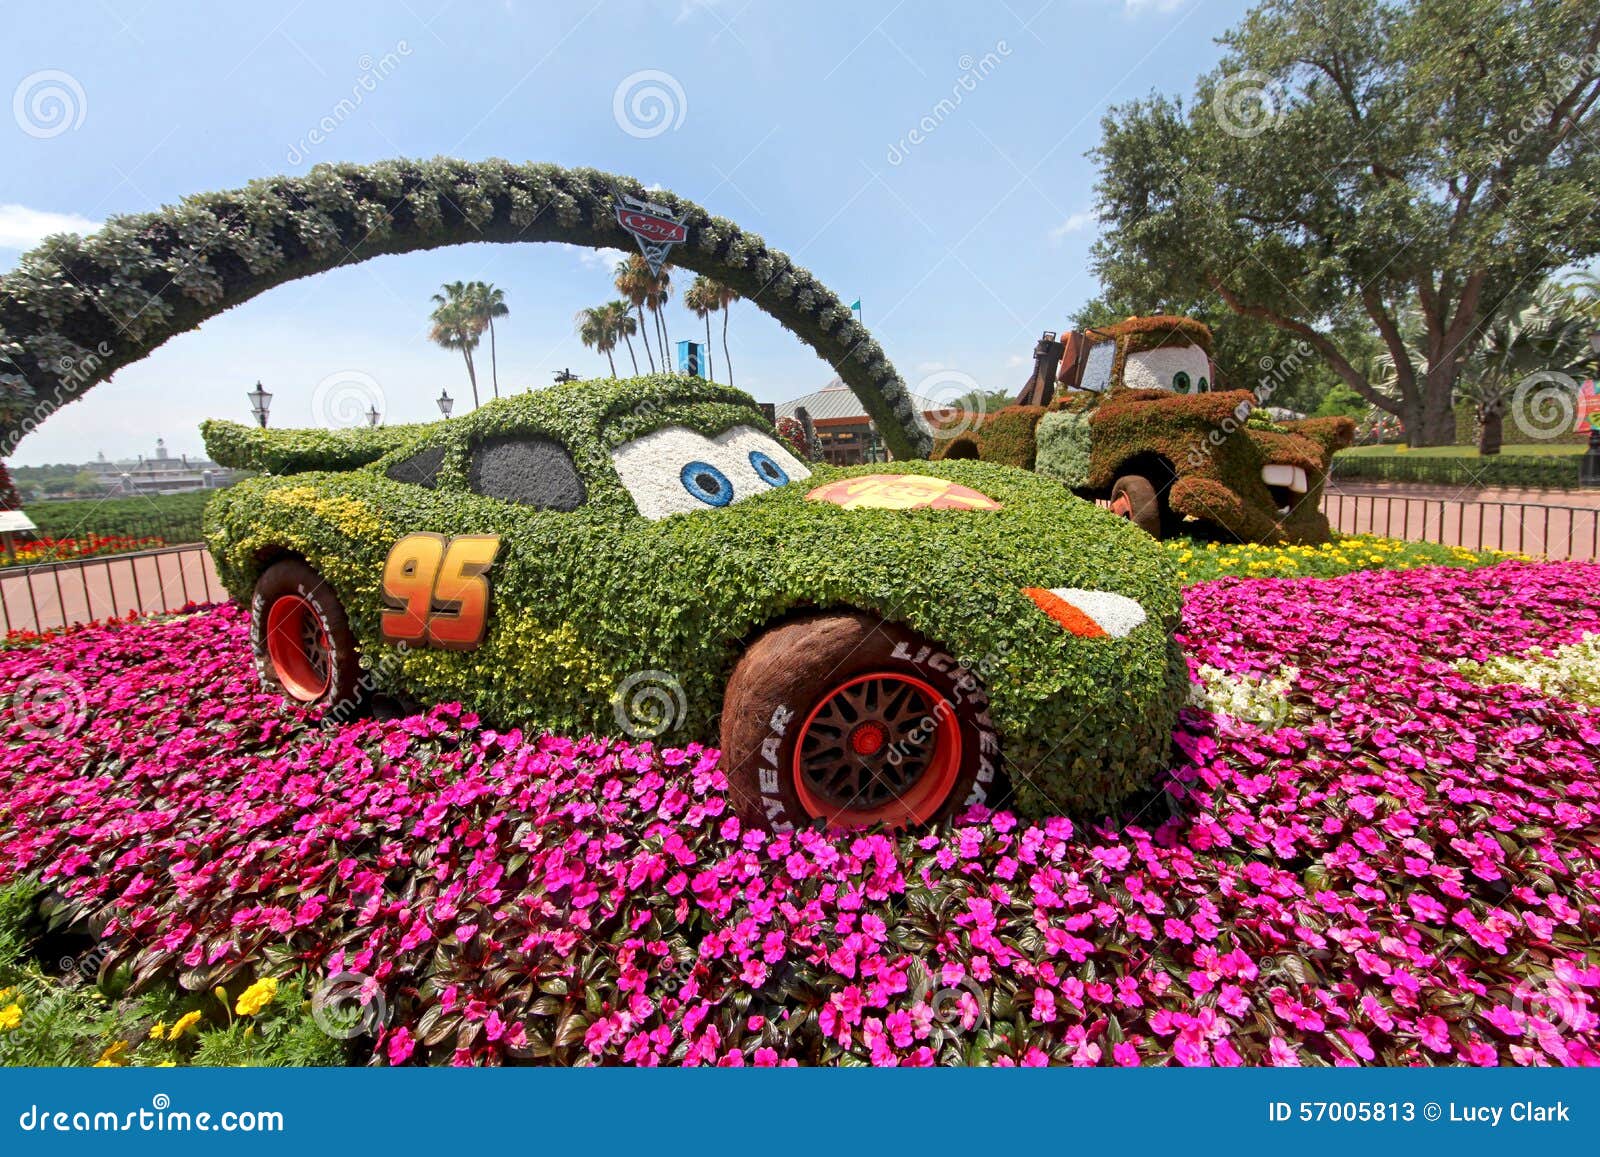 epcot flower and garden festival cars editorial stock photo - image